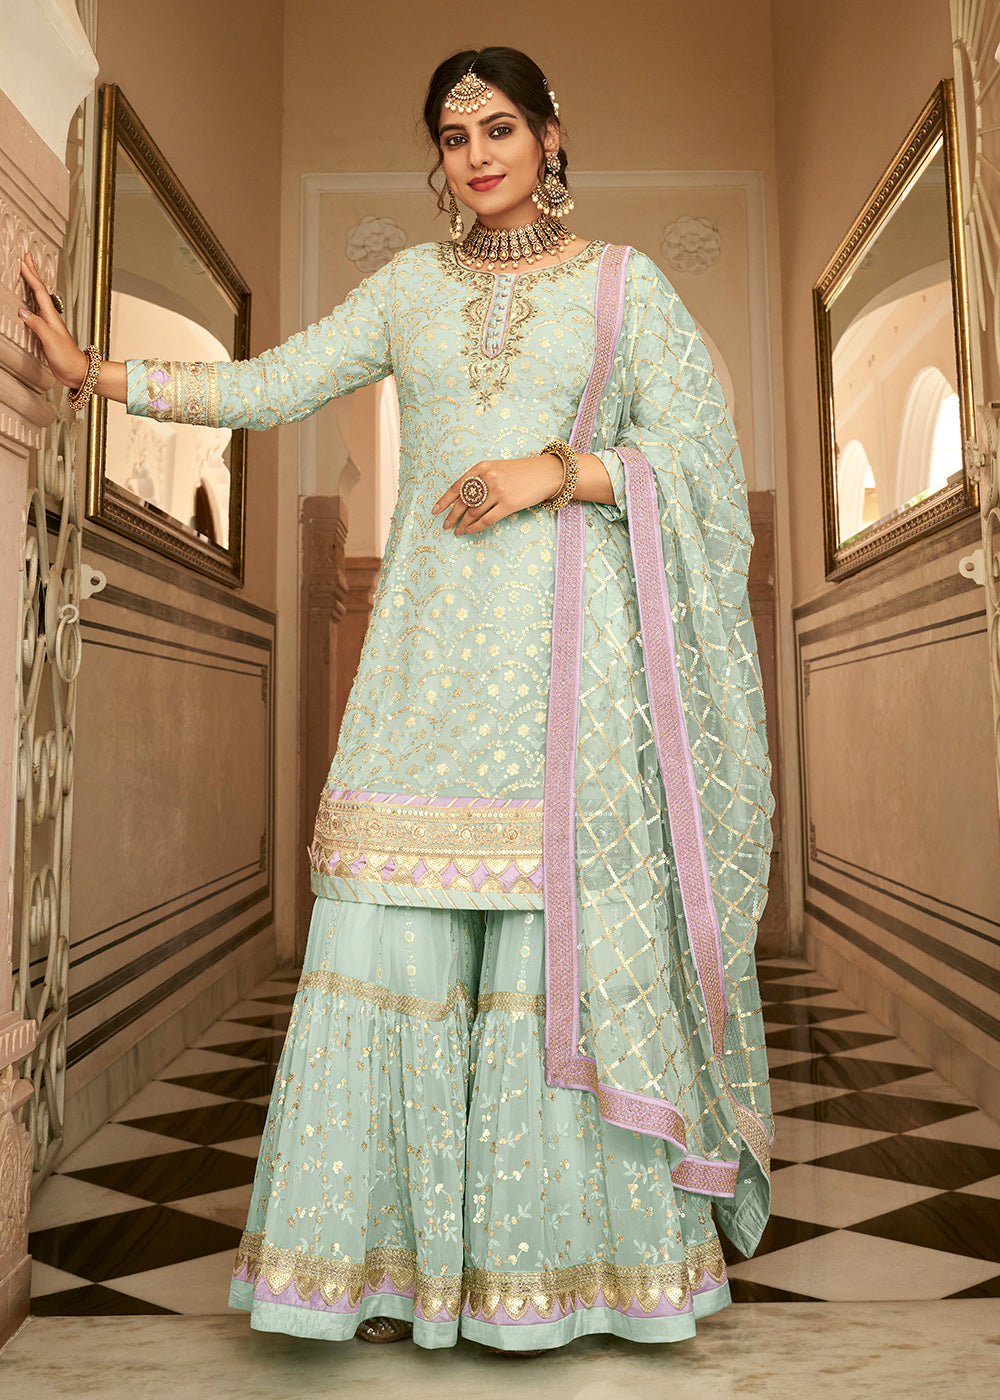 Shop Now Ice Blue Sequins Embellished Wedding Wear Sharara Style Suit Online at Empress Clothing in USA, UK, Canada, Germany & Worldwide.